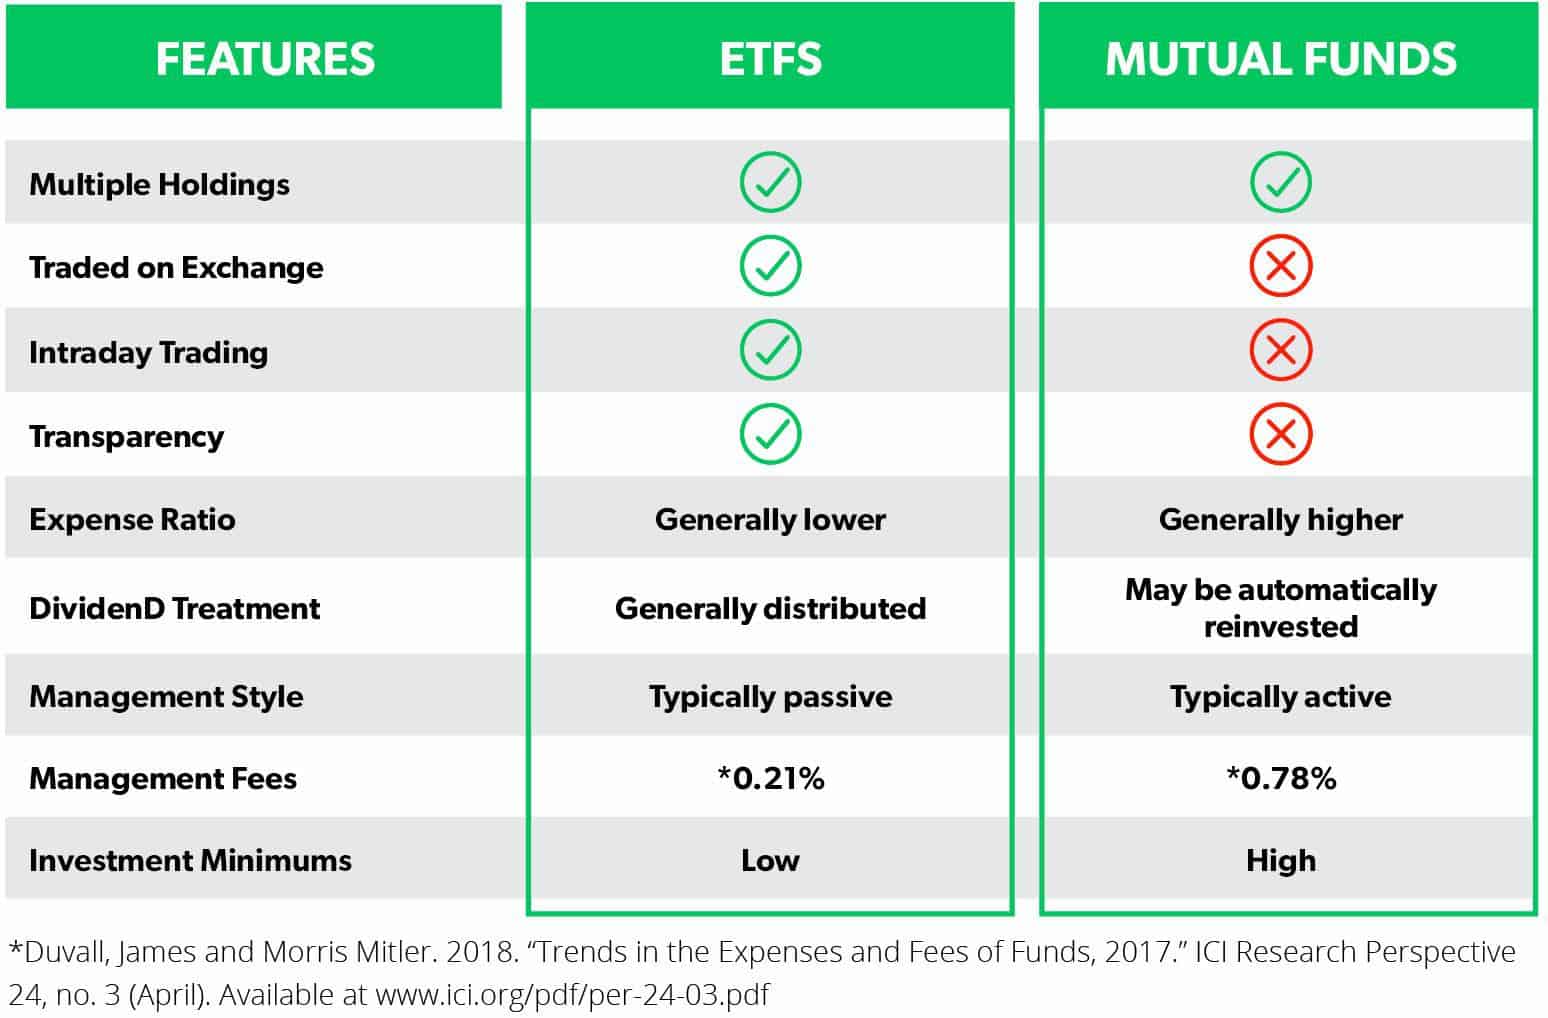 Etf сроки. Mutual Funds vs ETF. Management of mutual Funds. Инвестиционные фонды ETF. Sources & uses of Funds образец.